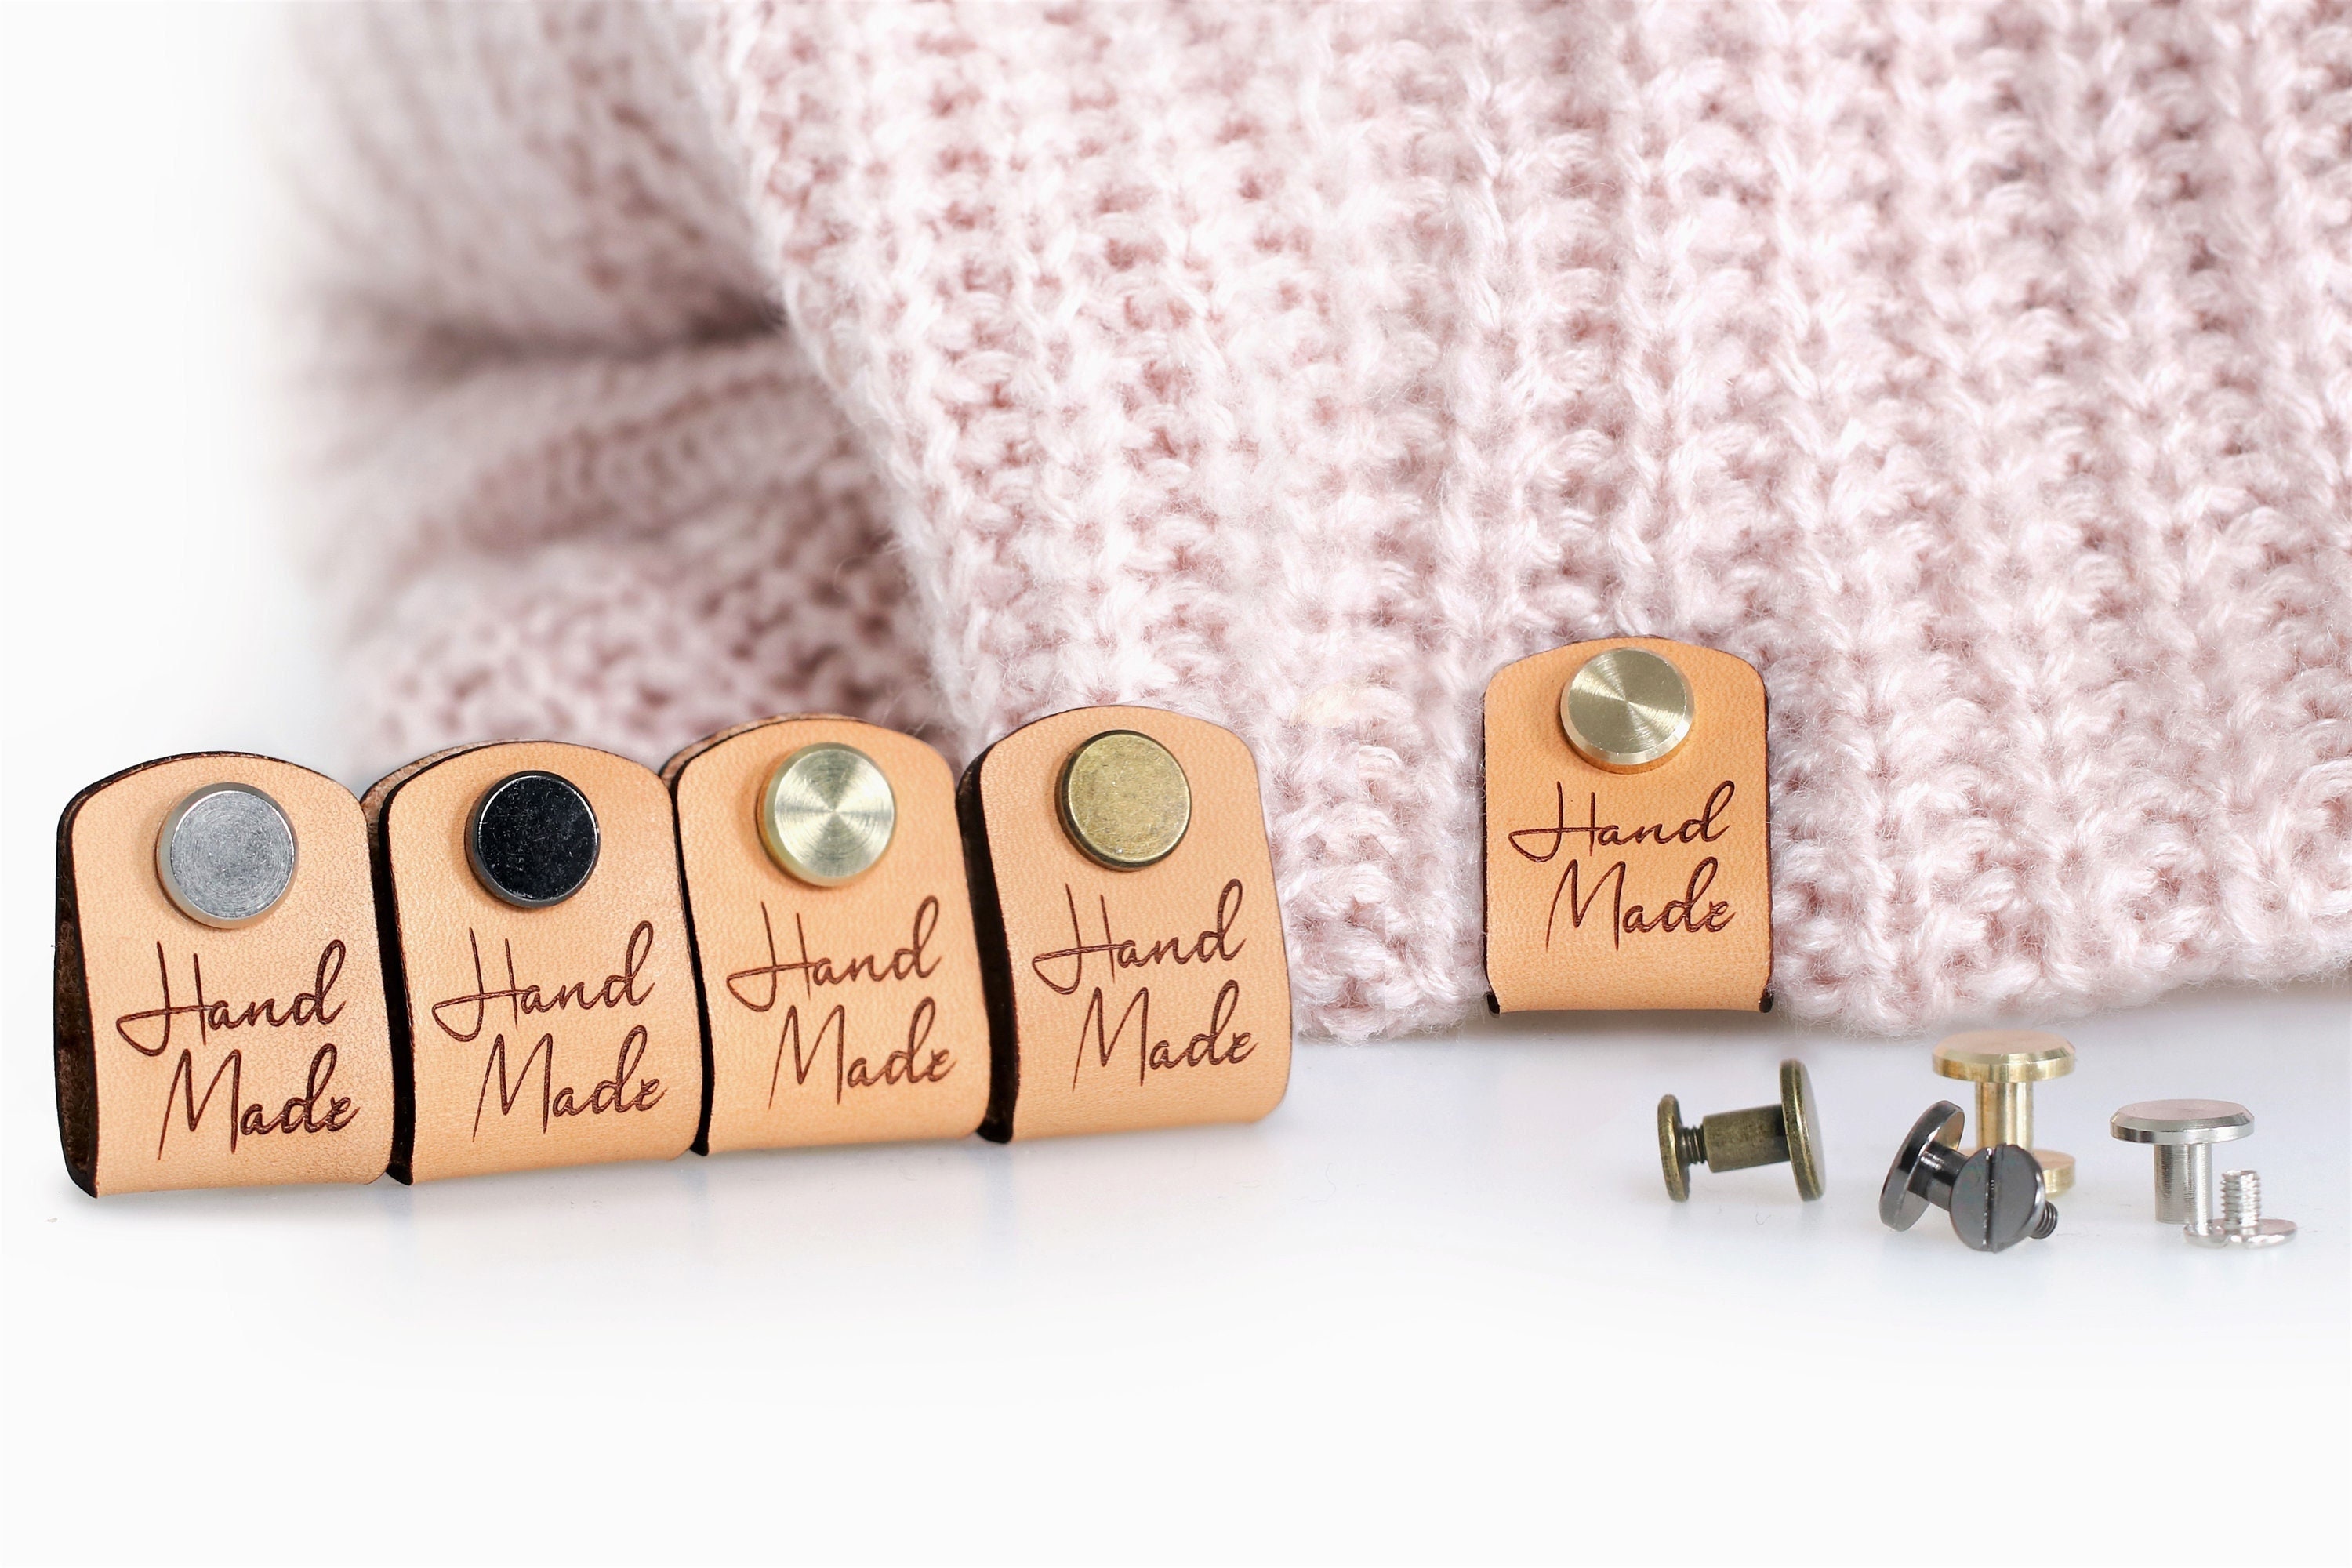 15x Customizable Rivet Leather Tags - Handmade labels with metal